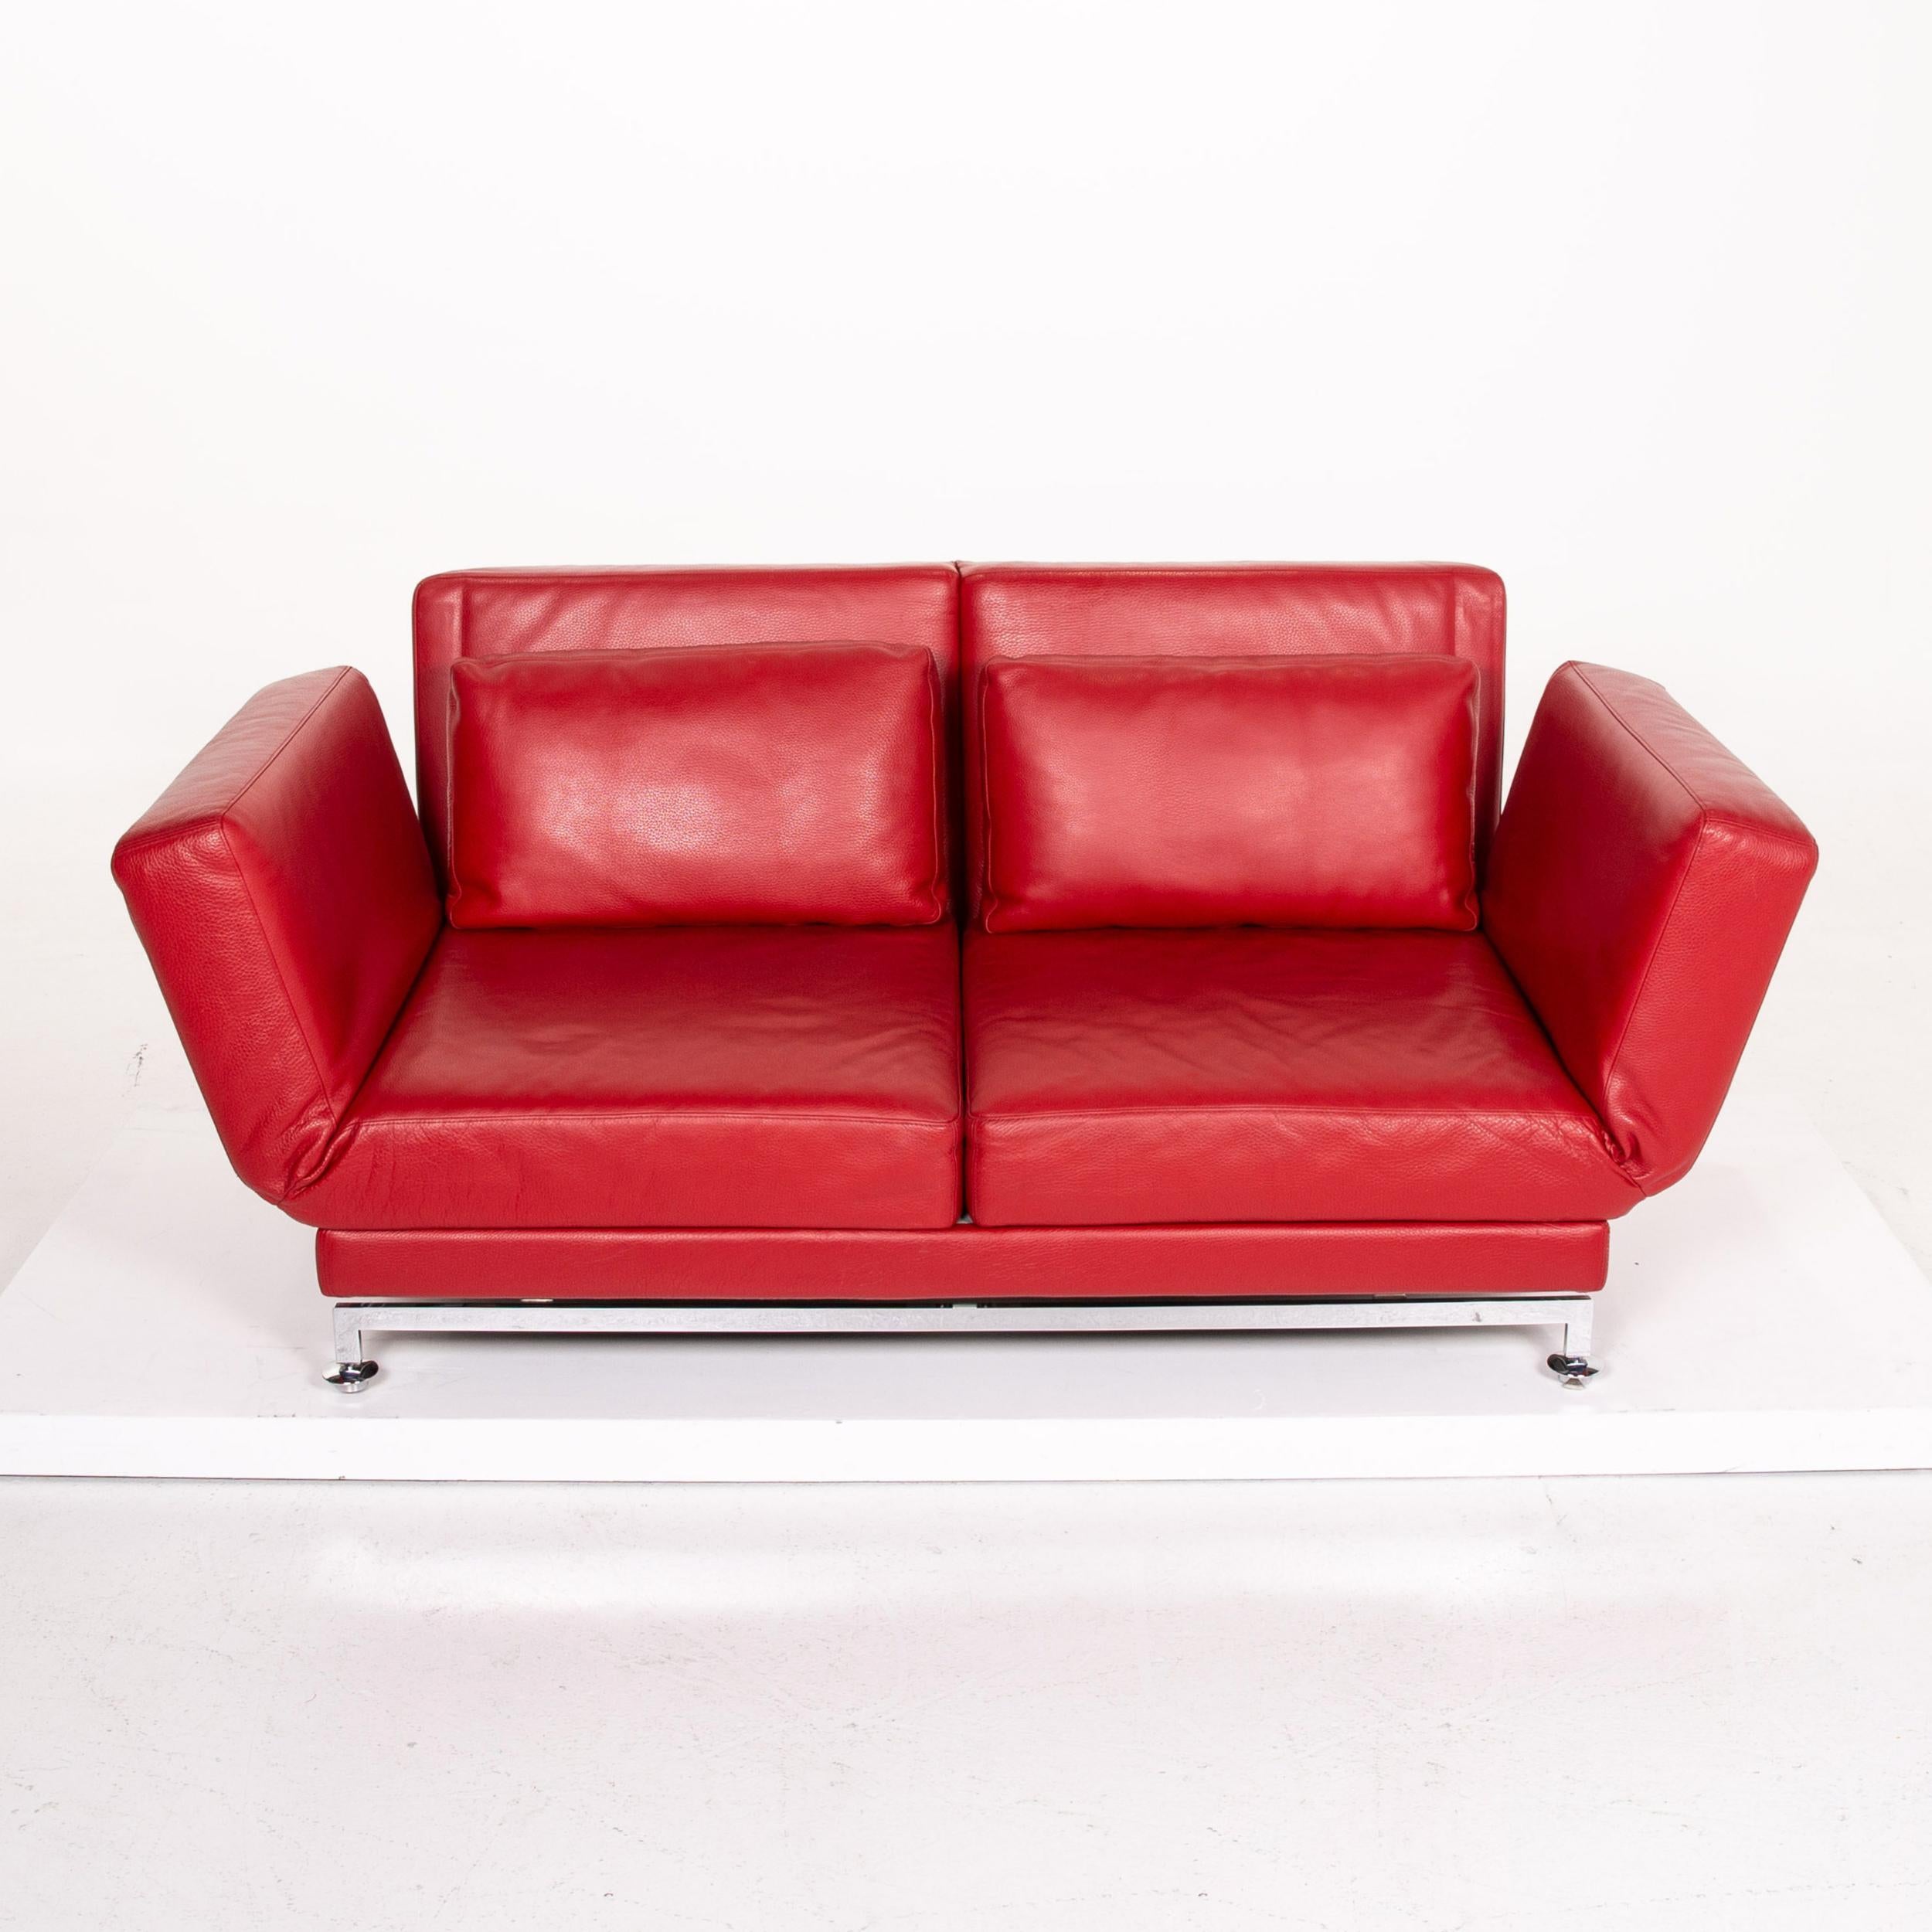 Brühl & Sippold Moule Leather Sofa Red Two-Seat Function Sofa Bed Sleep For Sale 3